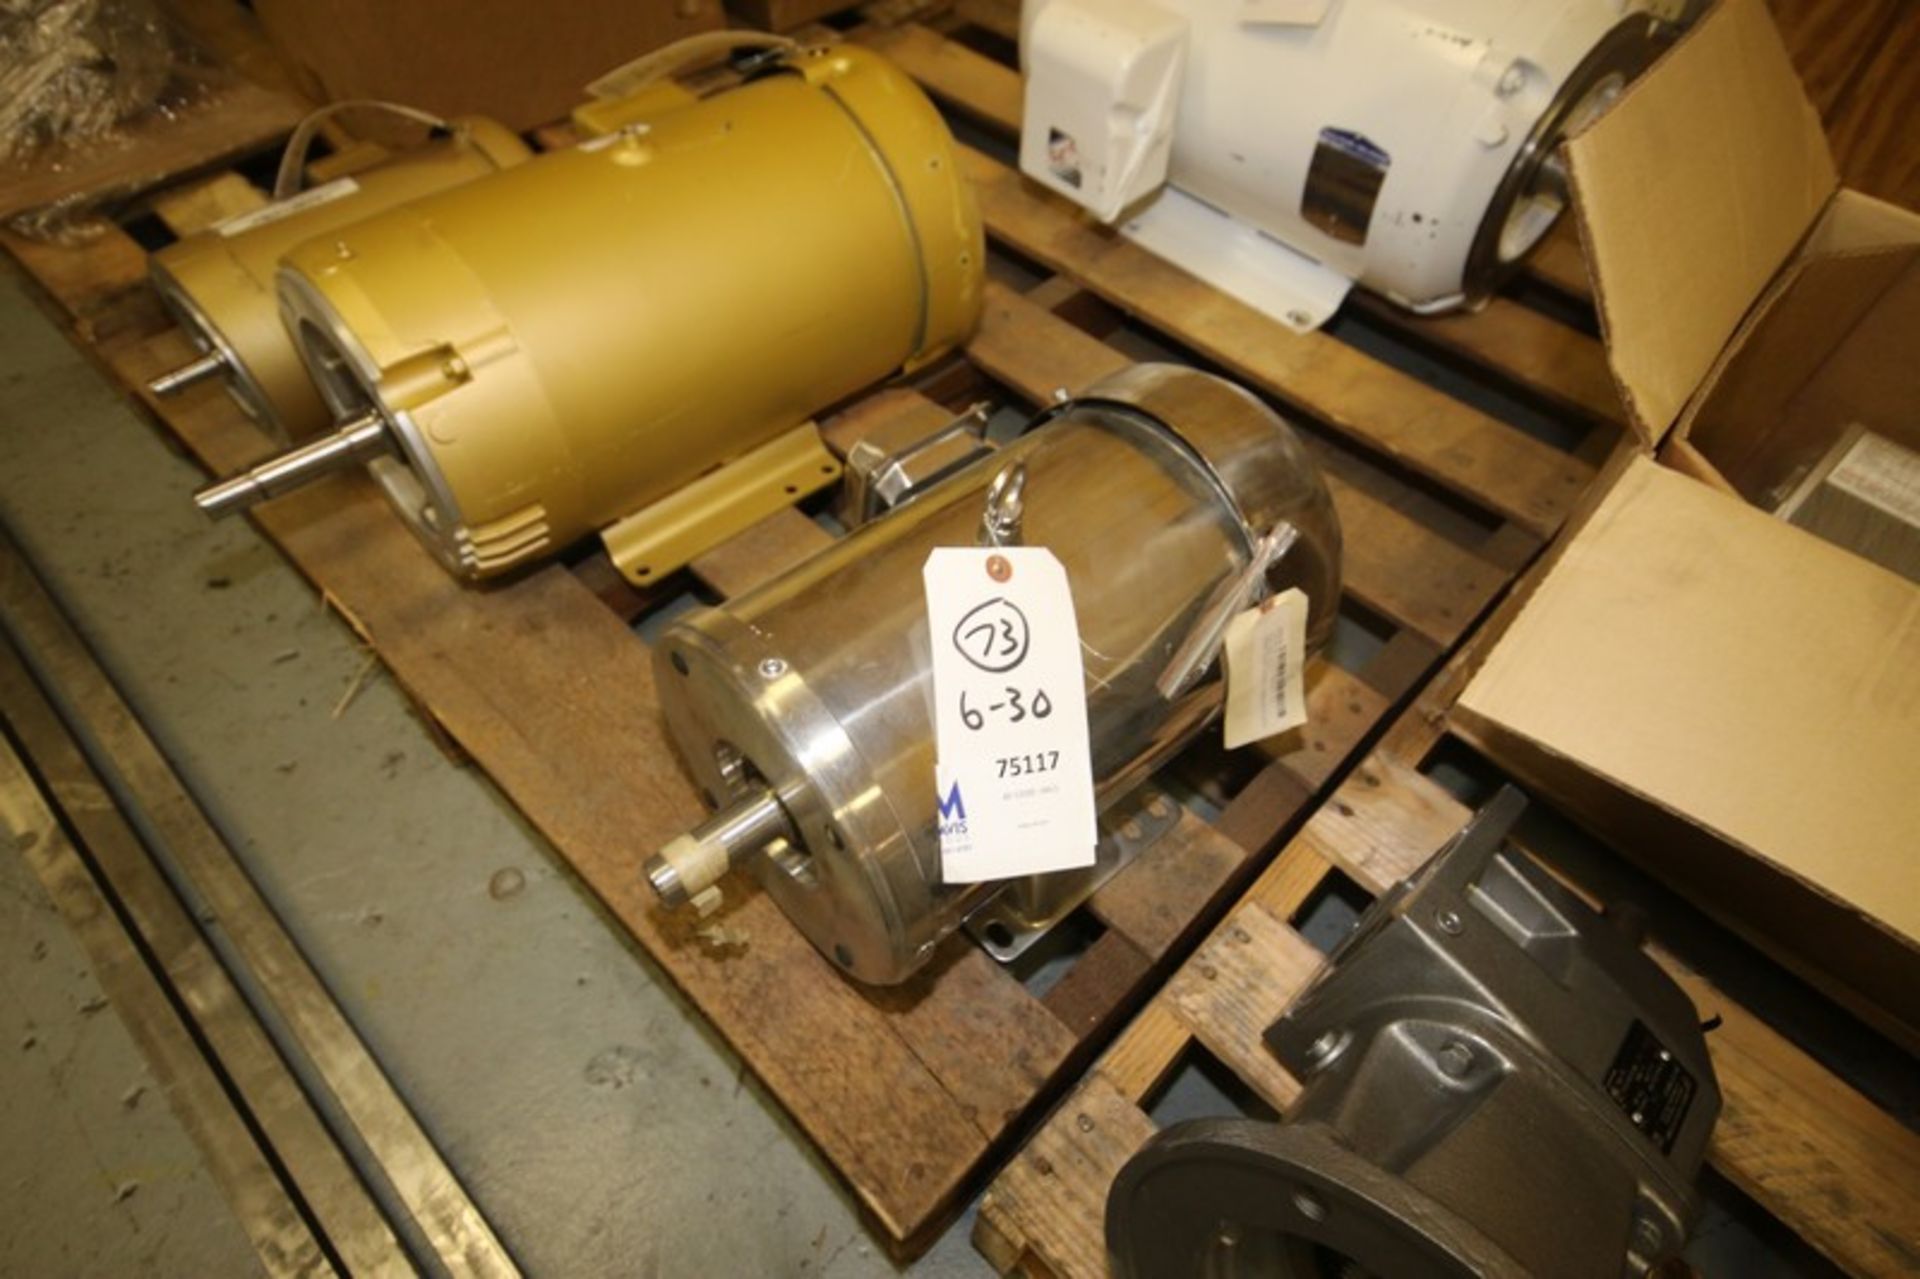 NEW Gator 3 hp S/S Clad Pump Motor,1765 RPM, Frame #182TX, 208-230/460 Volts, 3 Phase(INV#75117) ( - Image 2 of 2